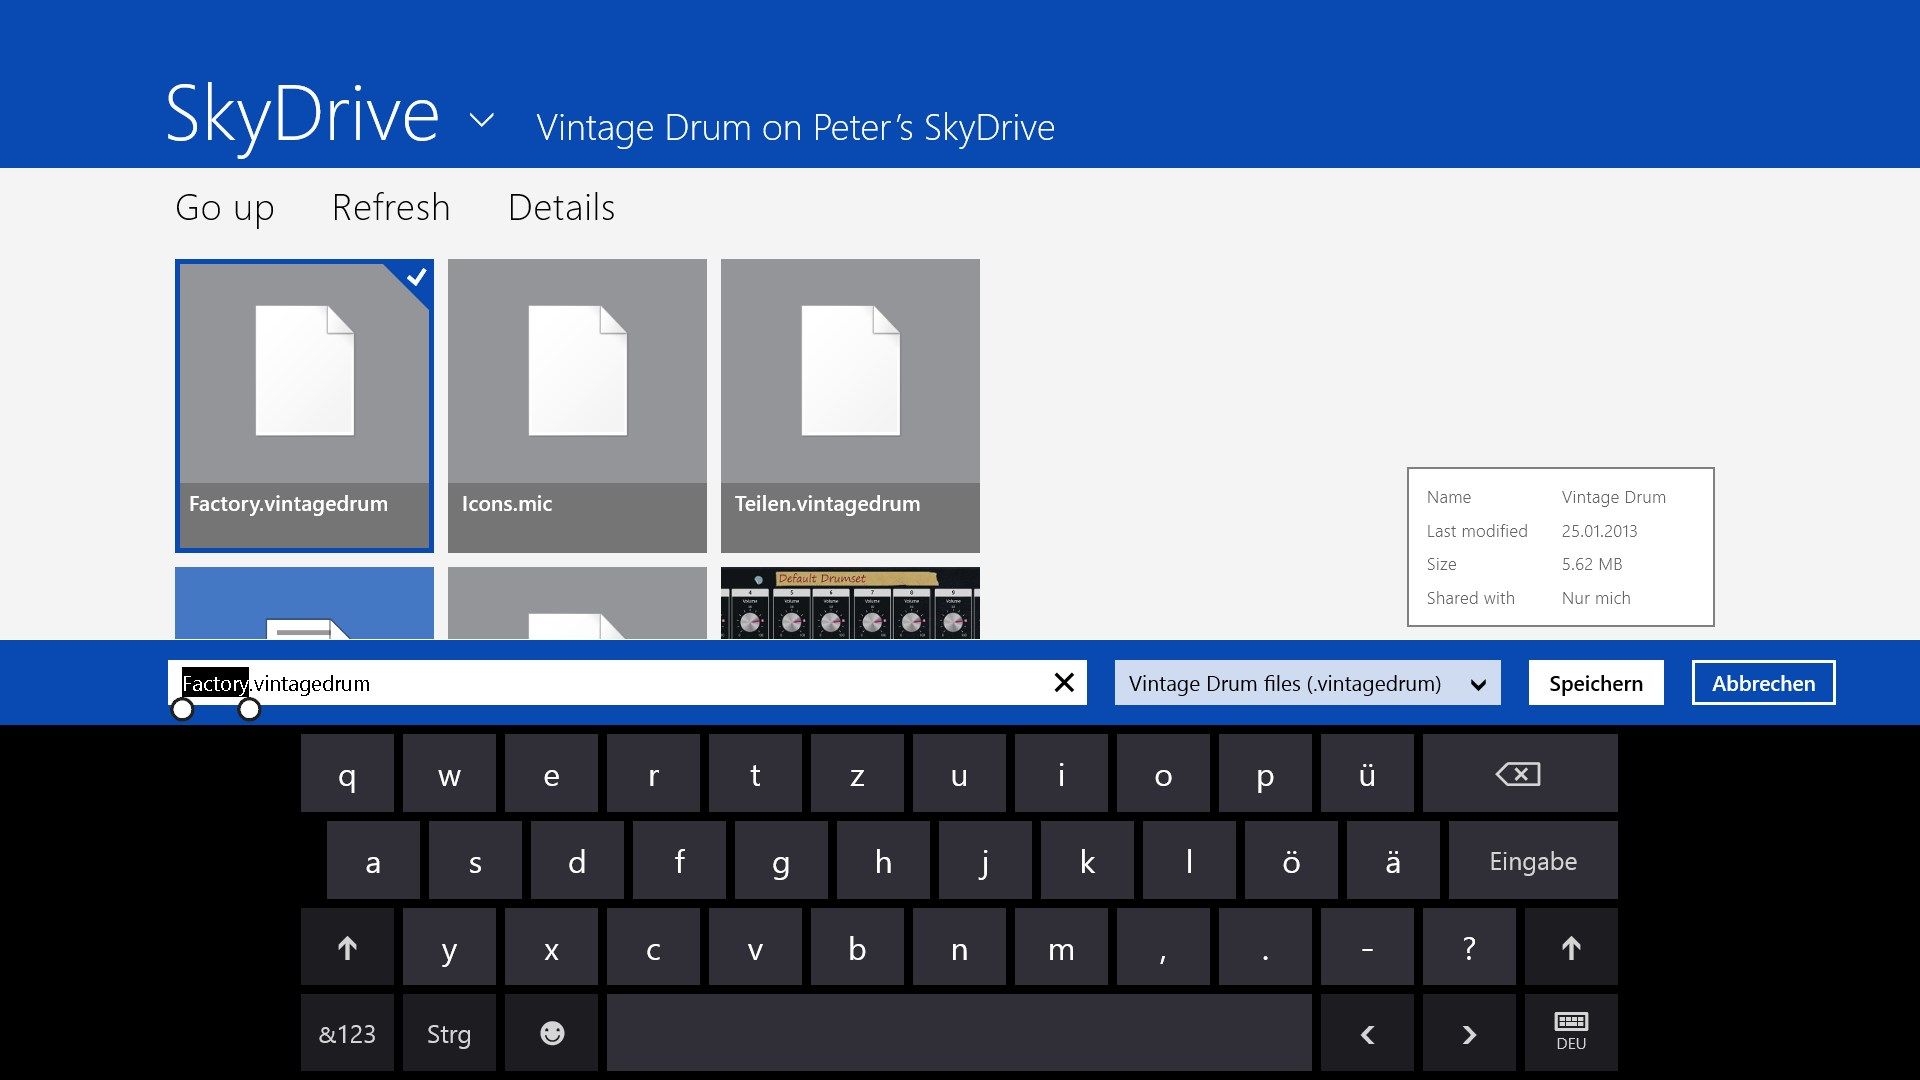 Save your drum settings where you want, for example on your SkyDrive.